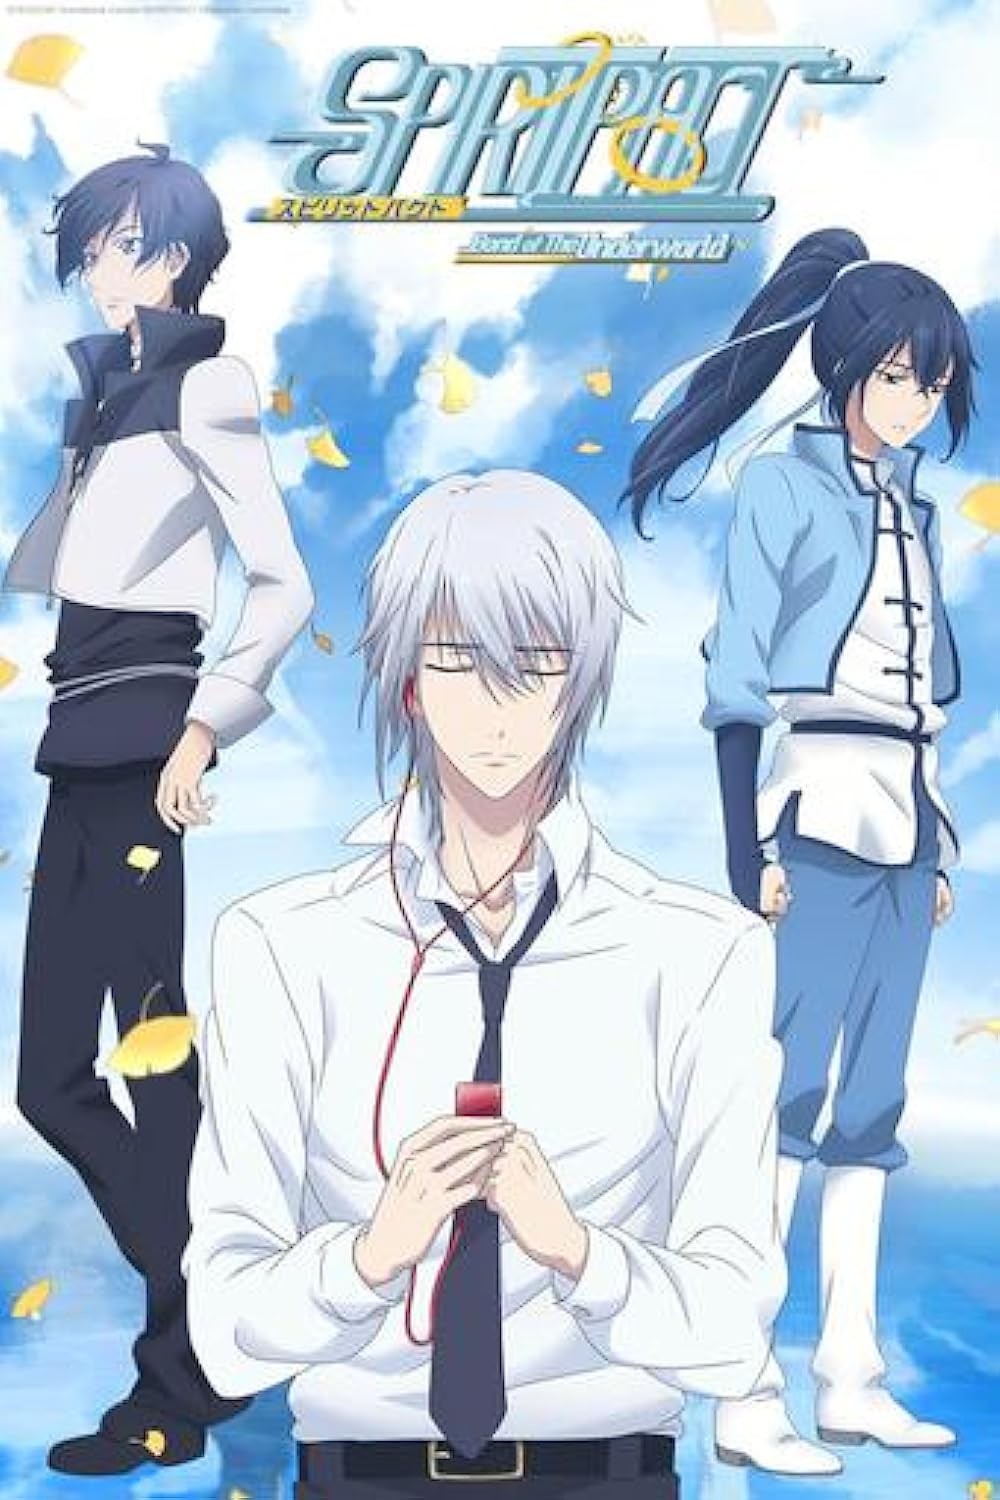 to baldly go — Things about Ling qi (Spiritpact) that you may not